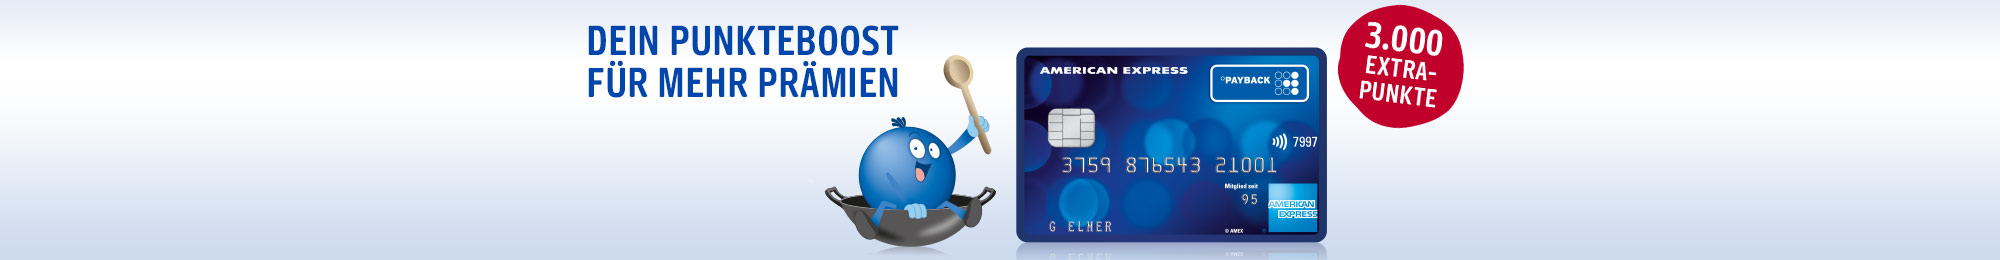 Amex-Special